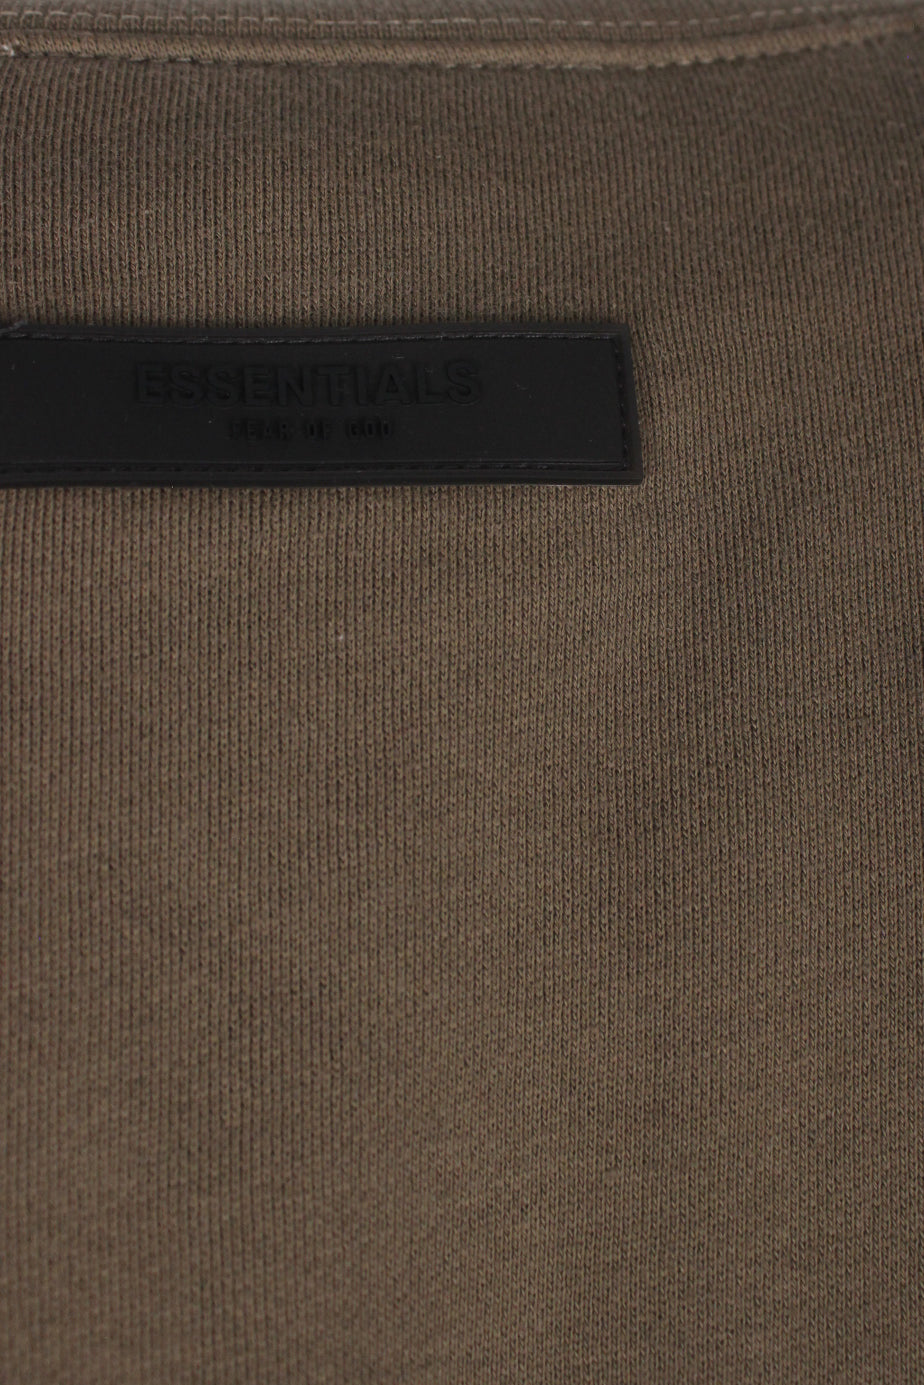 detail view of rubber 'essentials fear of god' logo tag at back of sweatshirt.